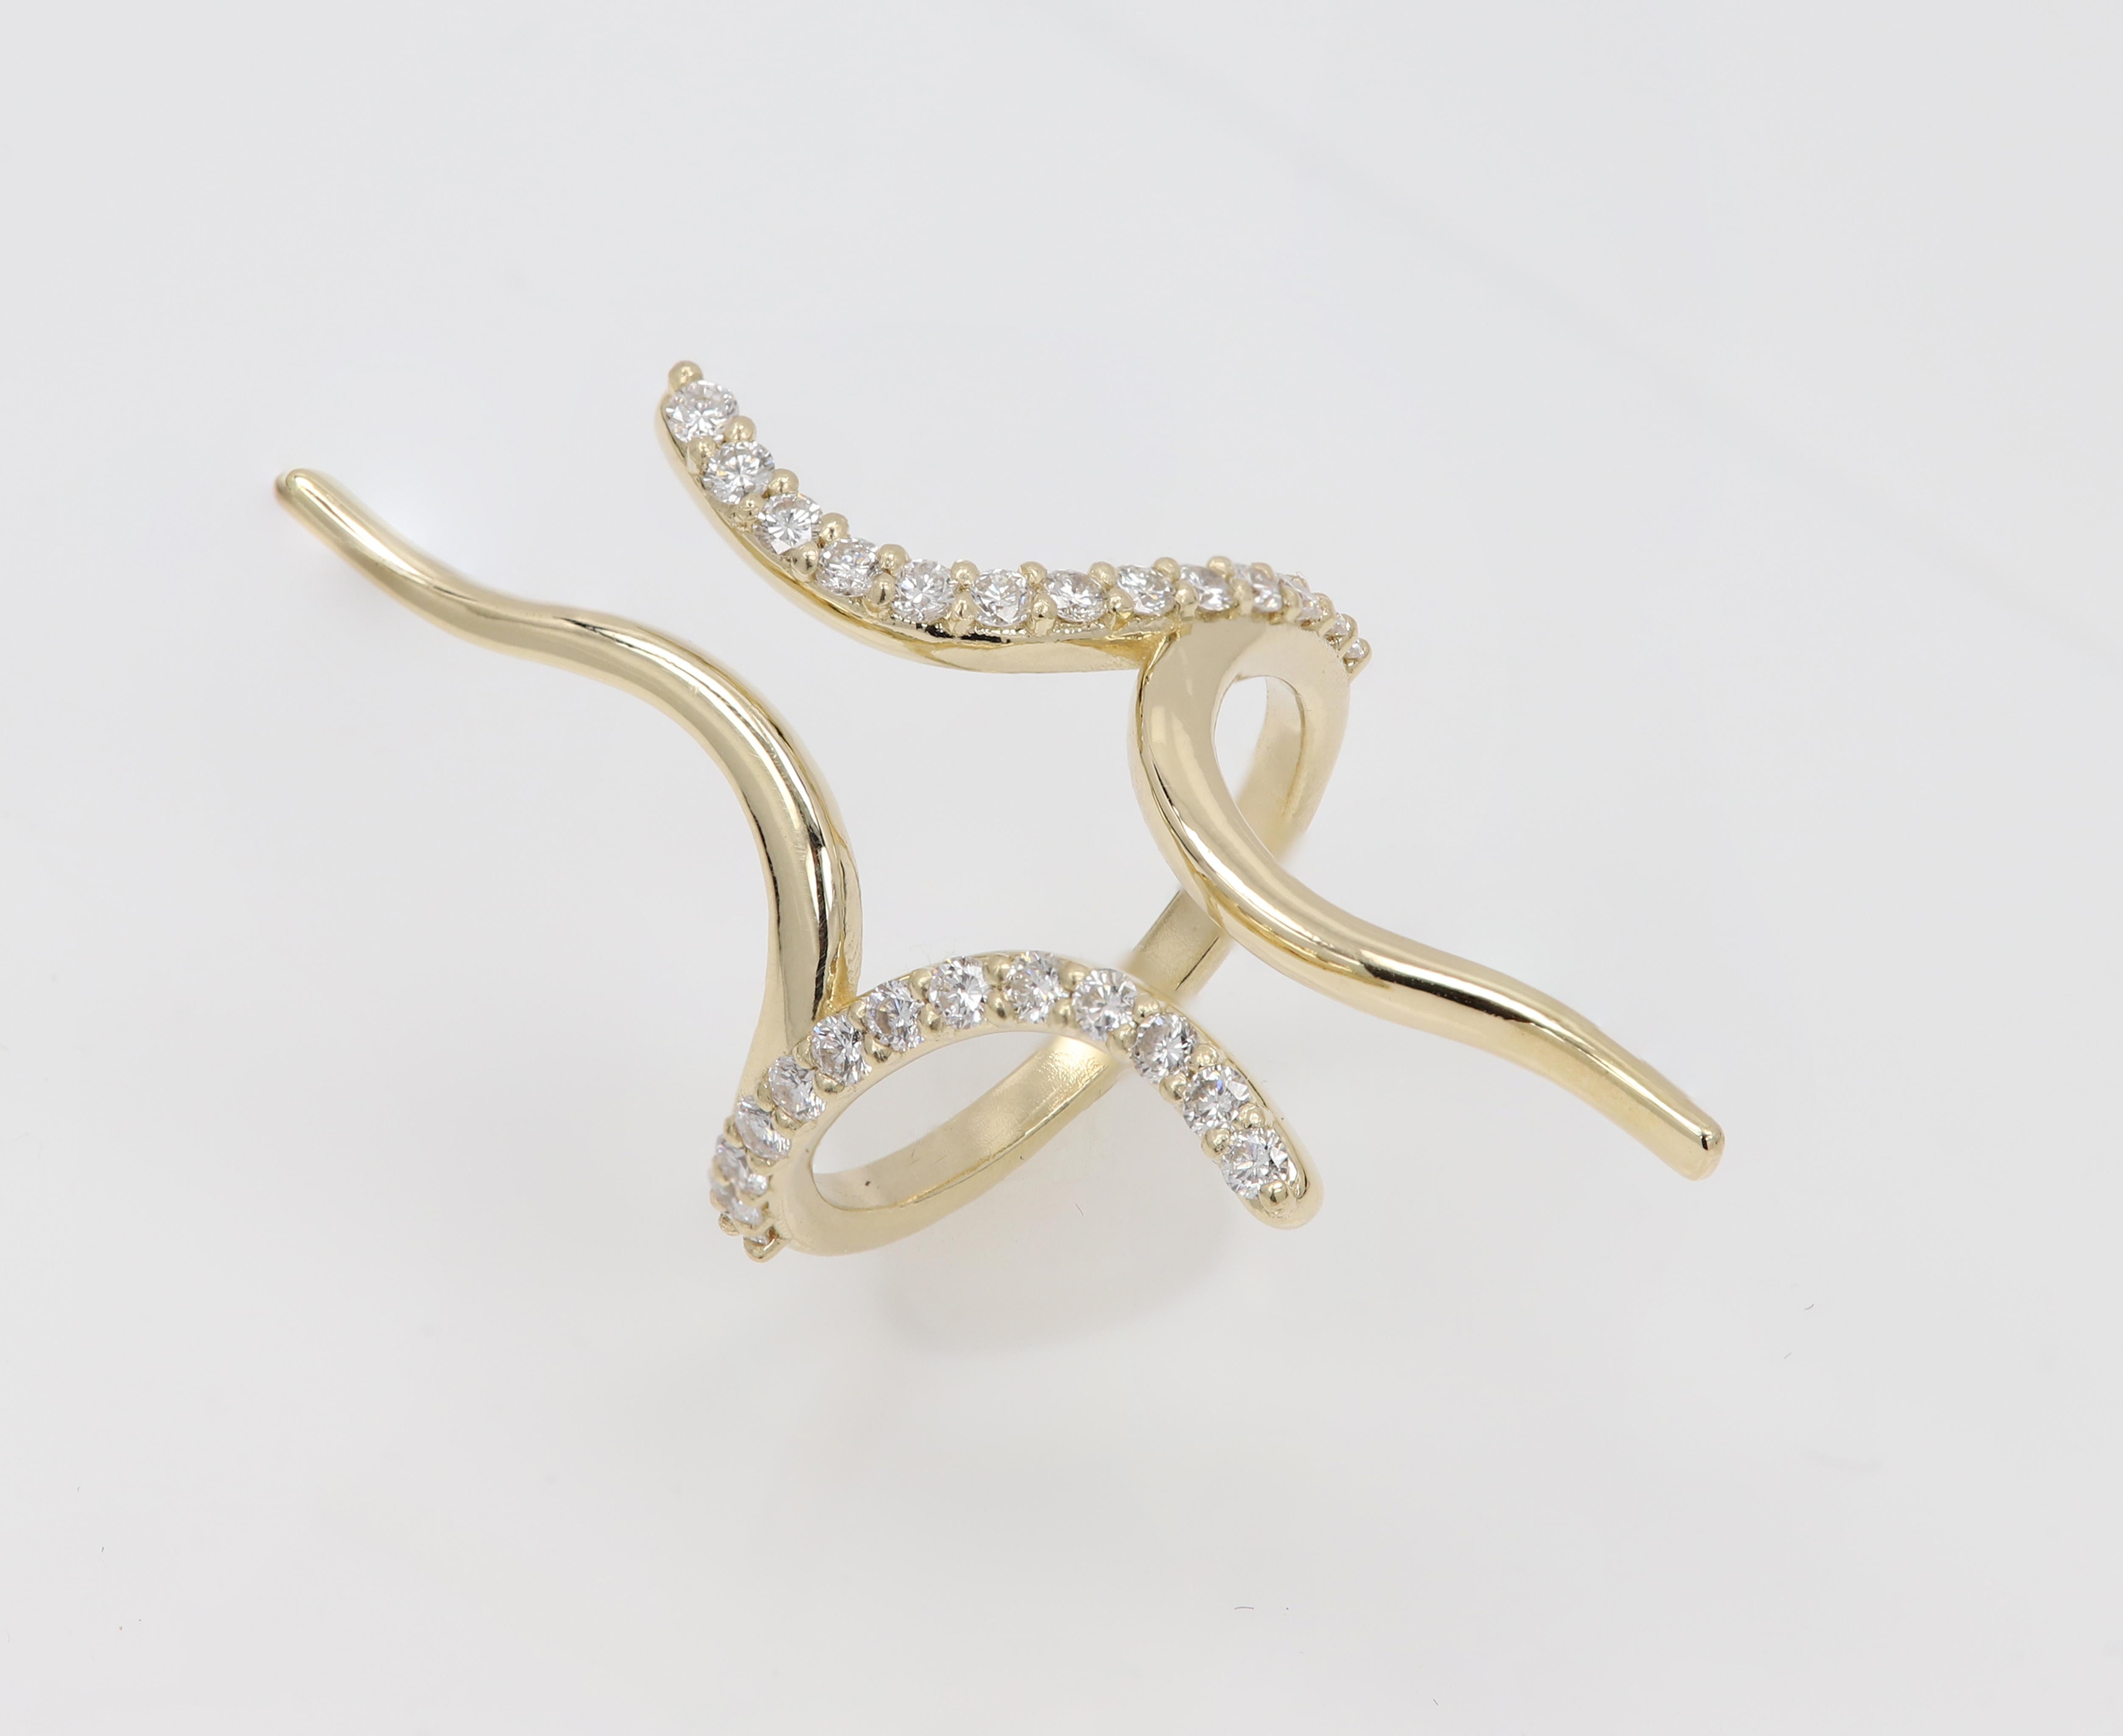 Edge Diamond Ring 14 Karat Yellow Gold Natural Diamonds Gold Wavy Ring In New Condition For Sale In Brooklyn, NY